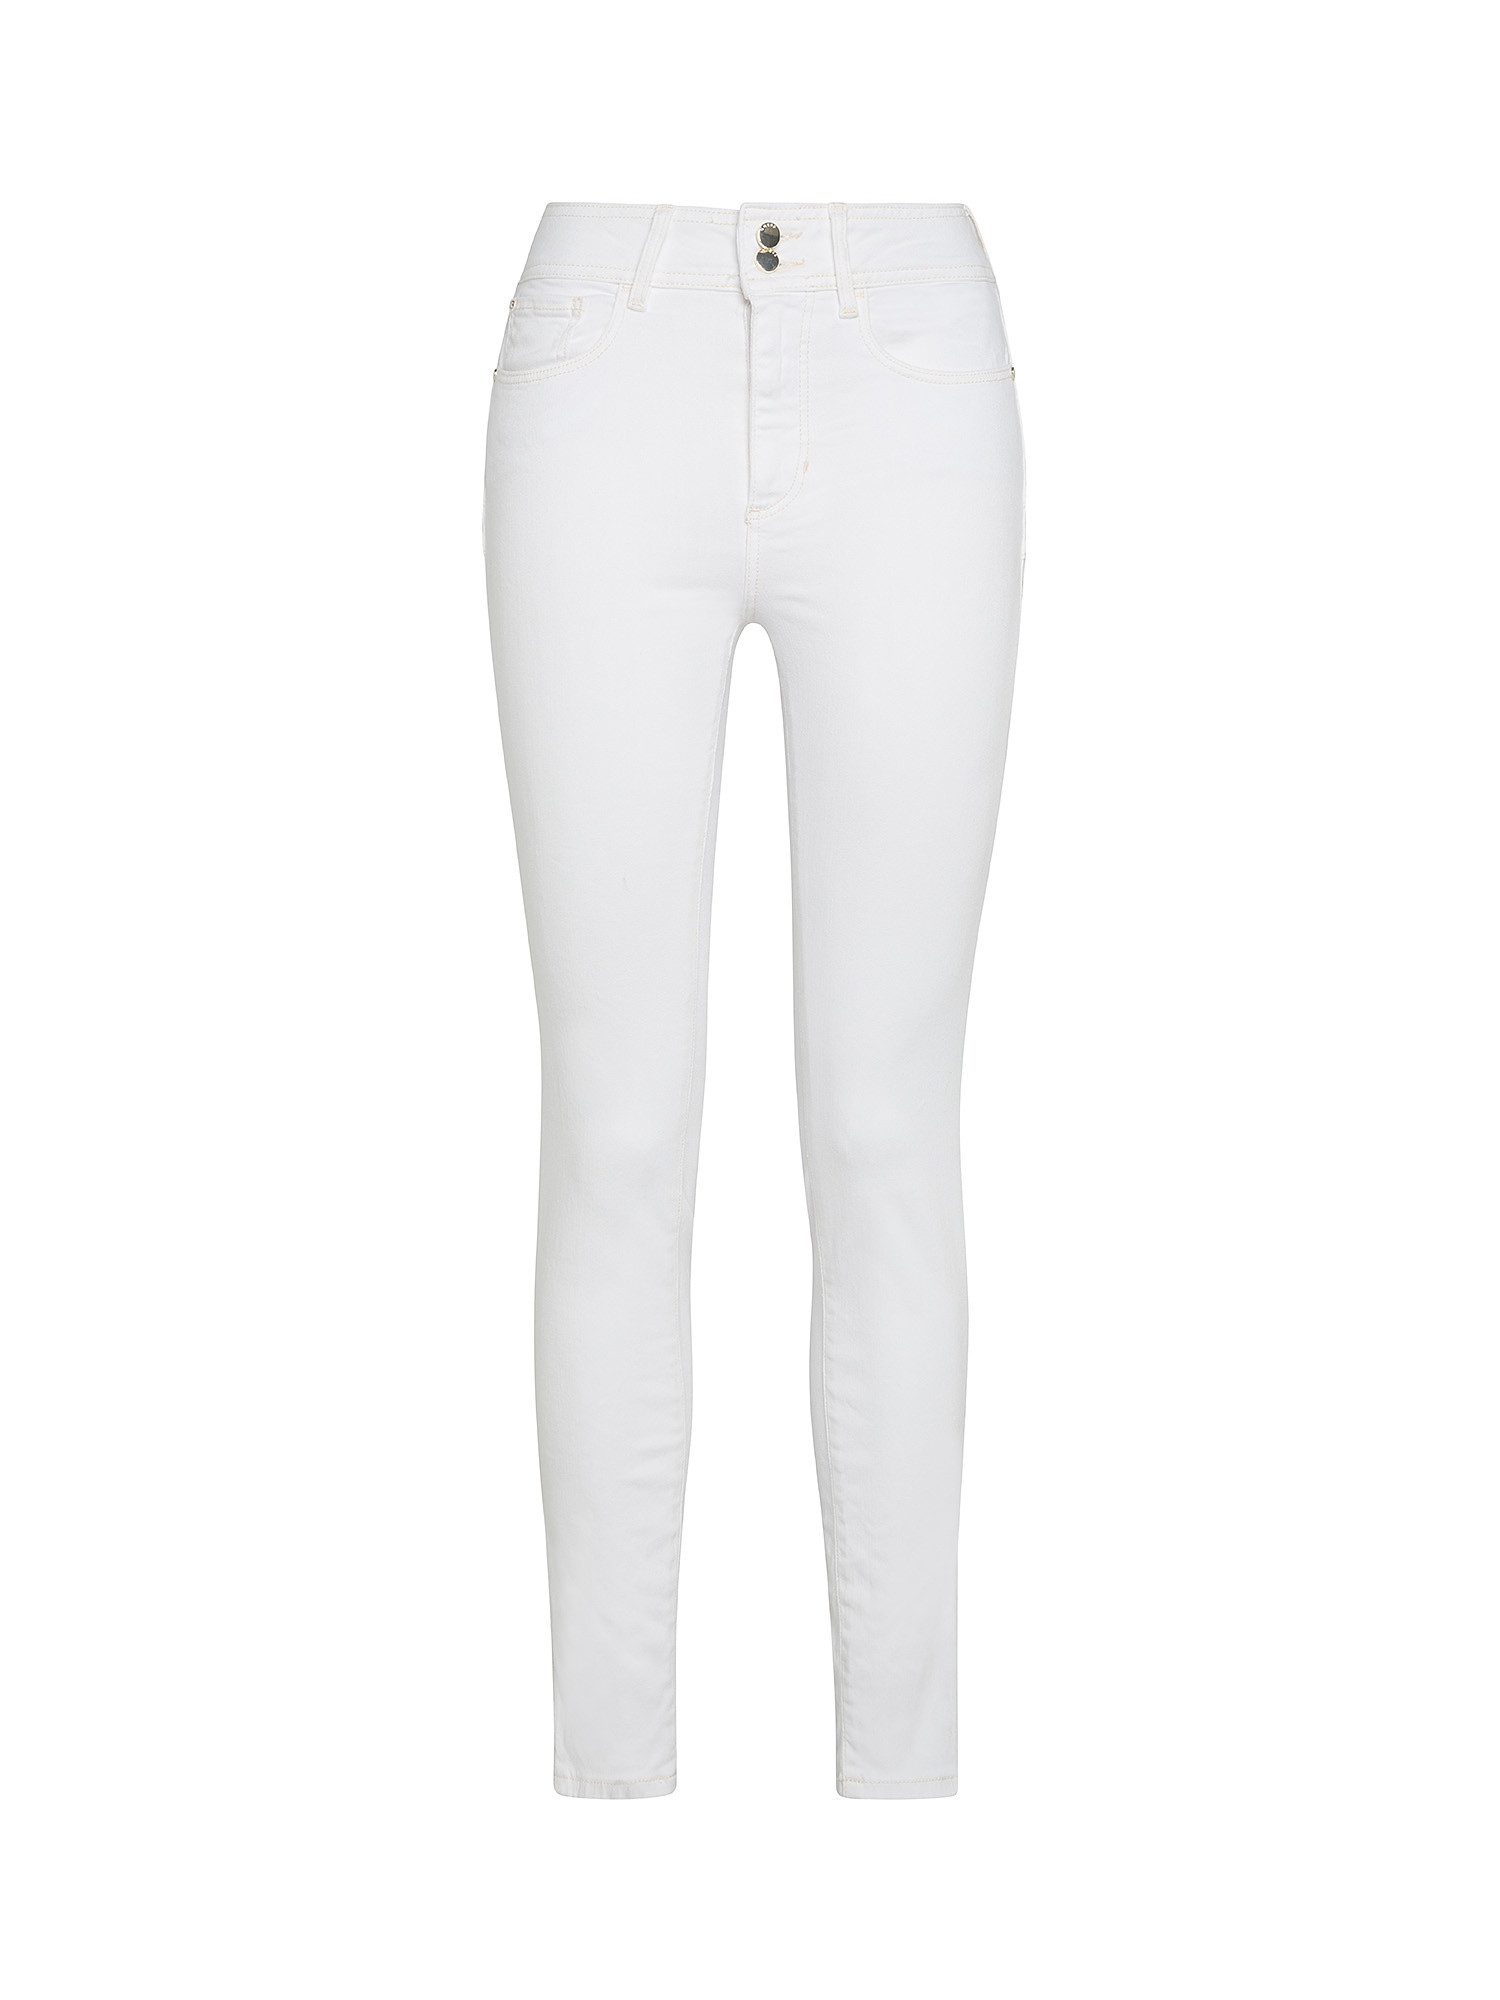 GUESS - Jeans skinny a vita alta, Bianco, large image number 0